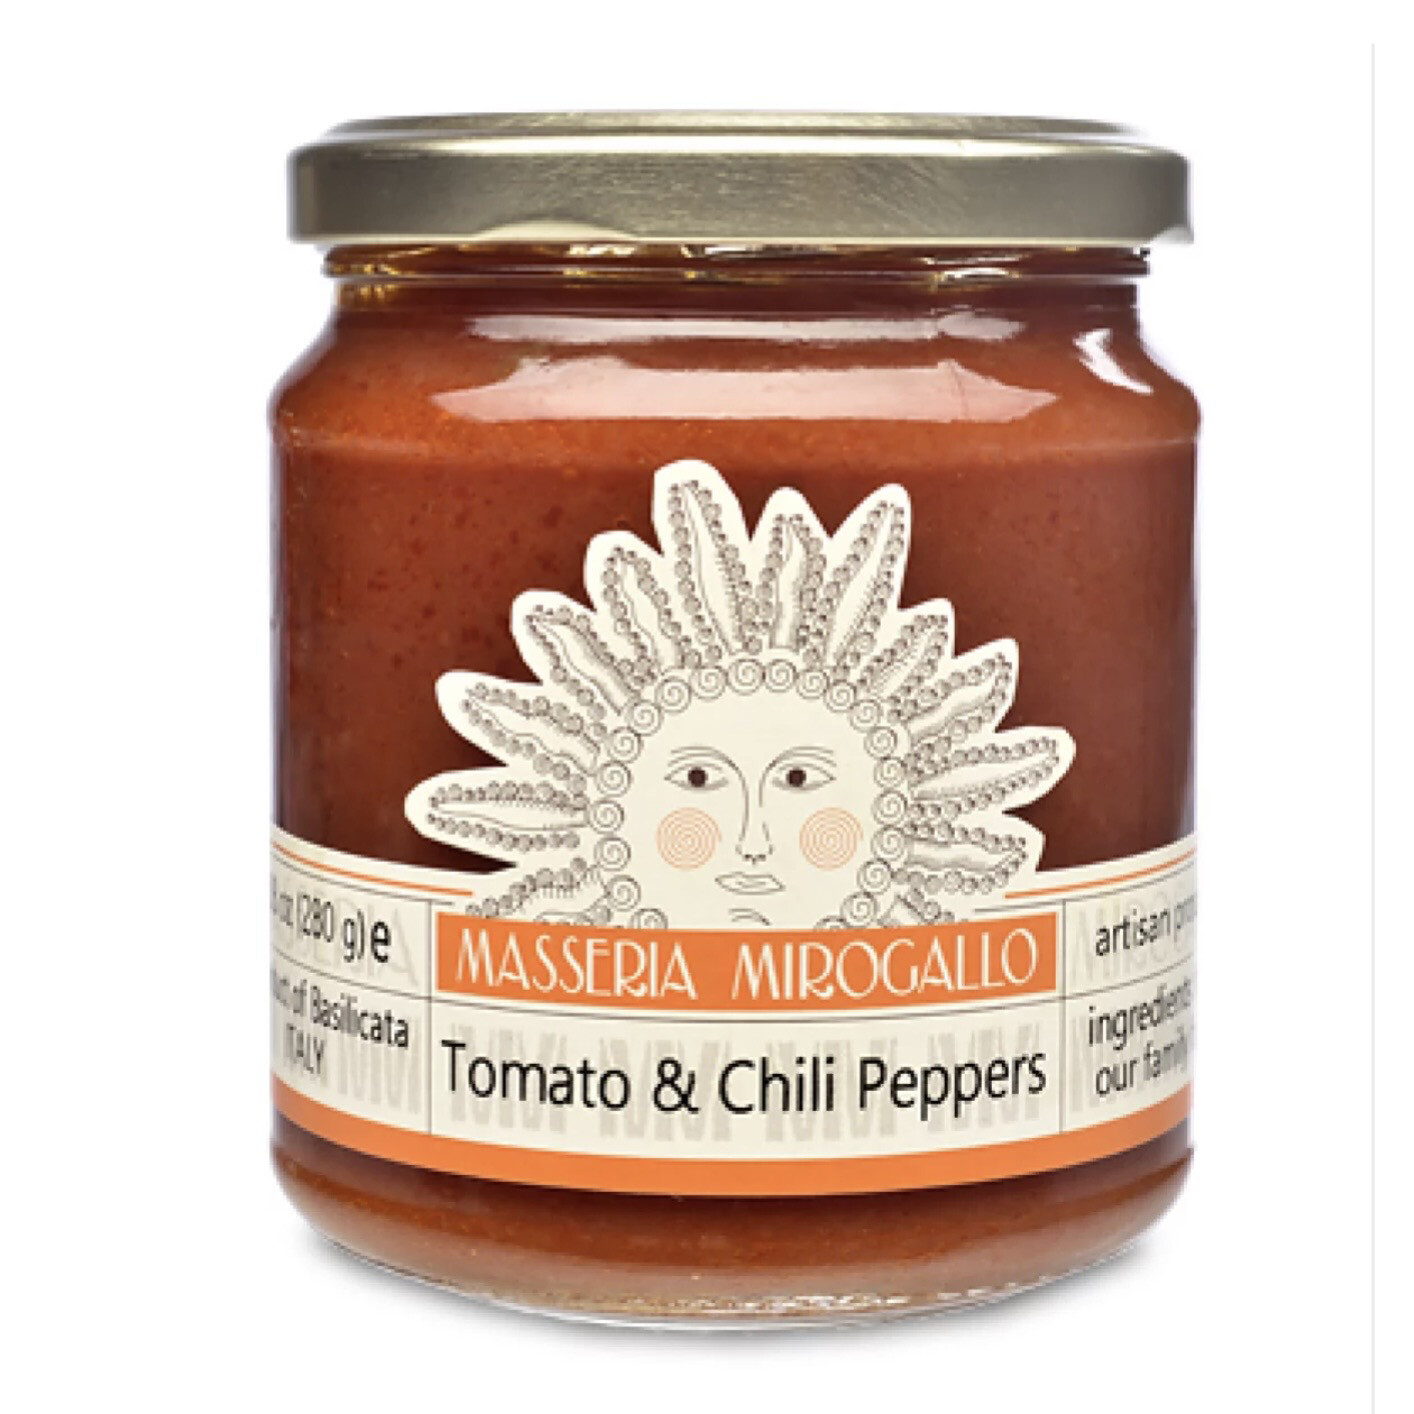 mirogallo tomato sauce with chili peppers